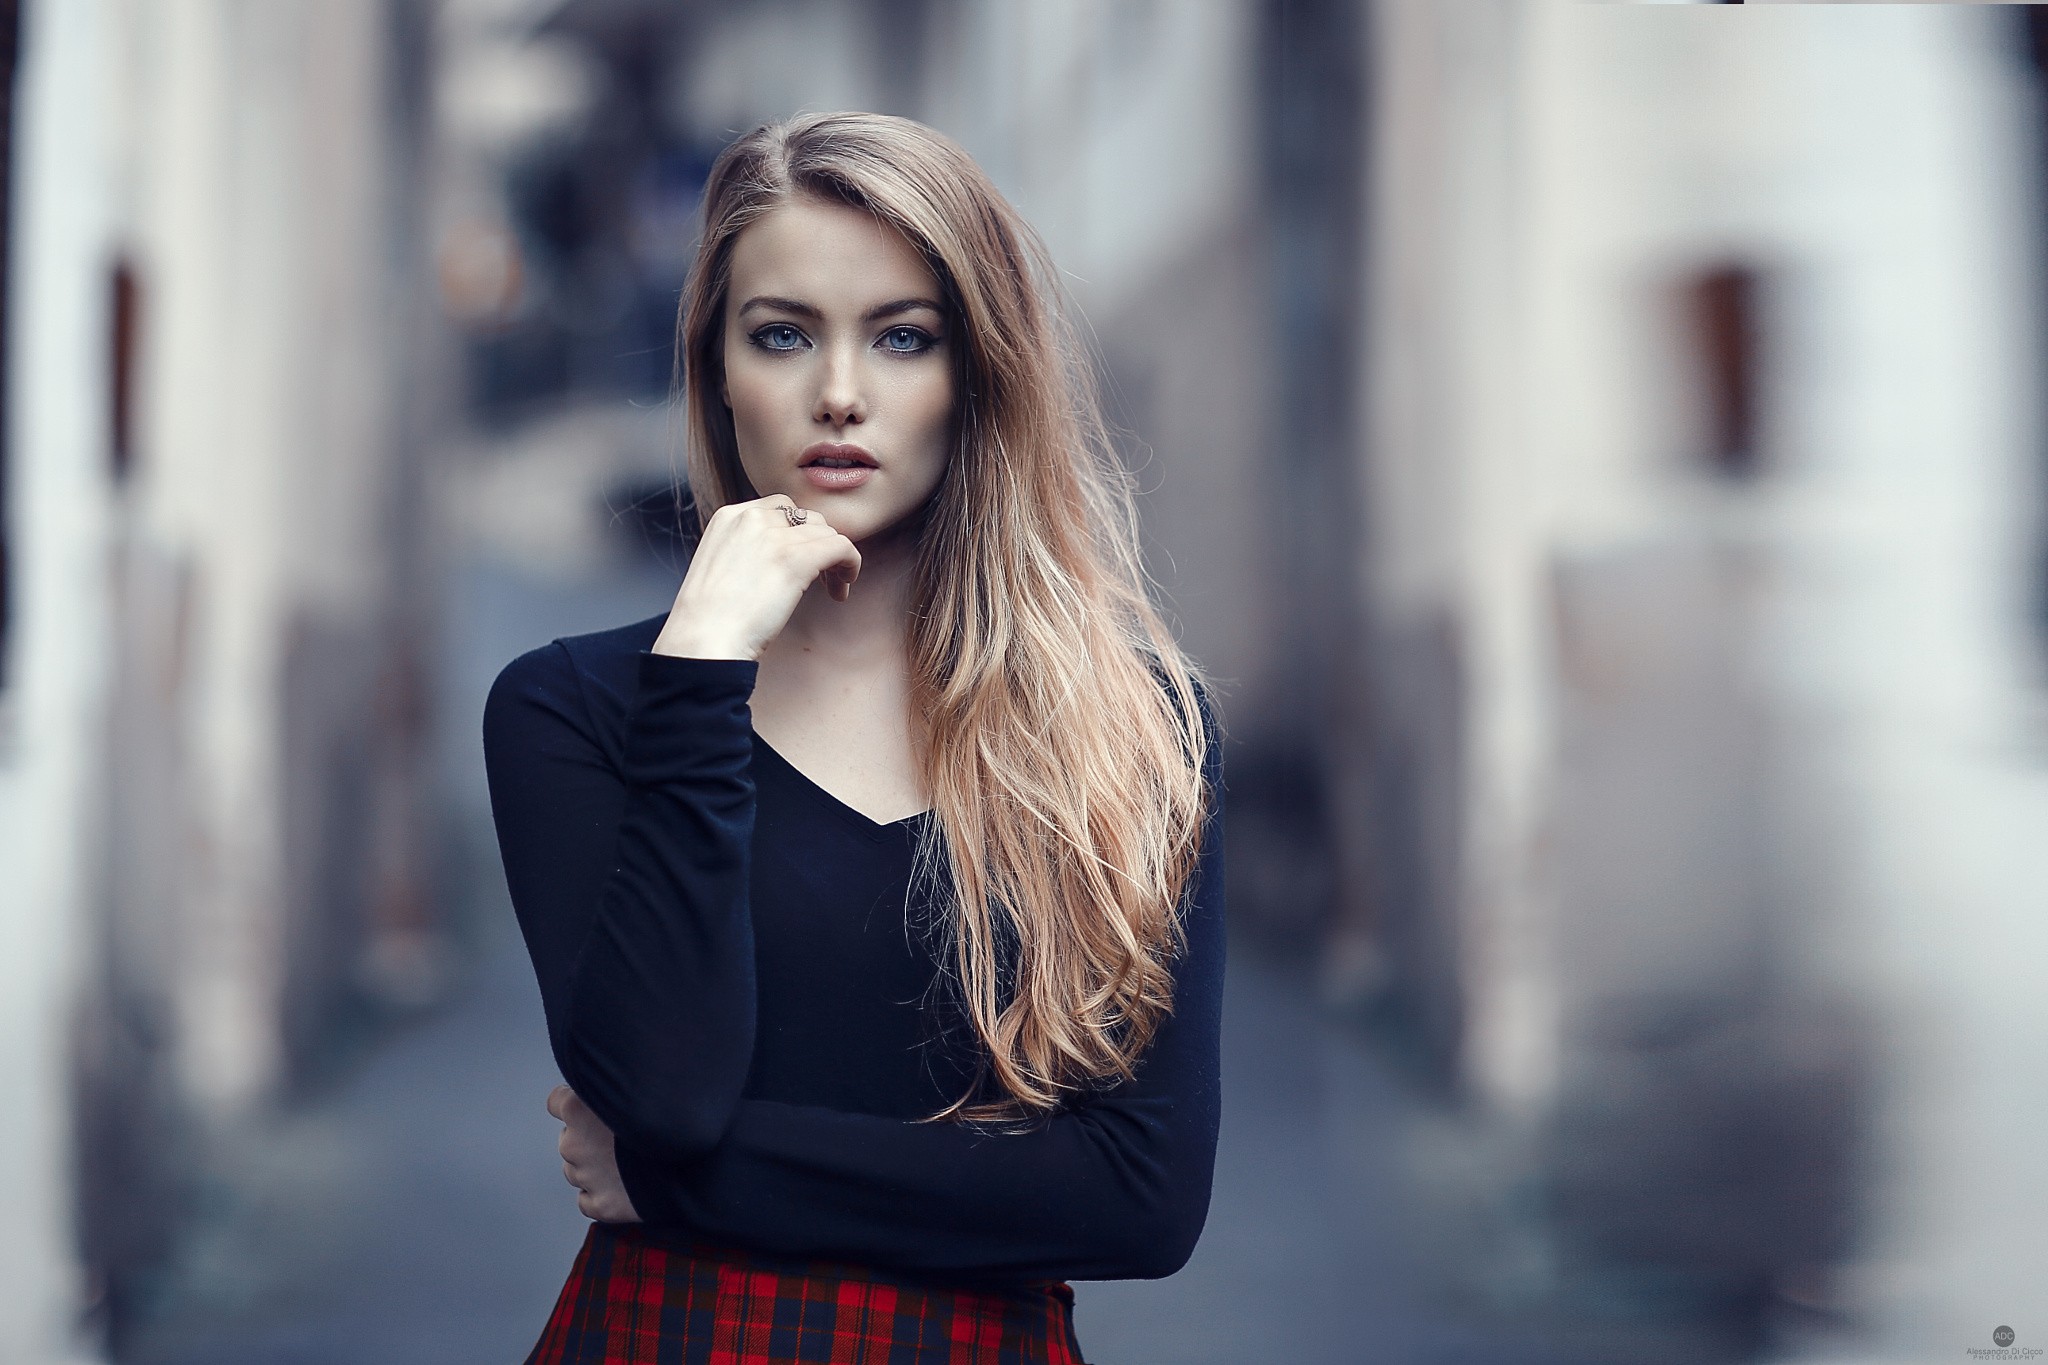 People 2048x1365 blonde women model portrait looking at viewer eyeliner black top pink lipstick Alessandro Di Cicco April Slough hand on face women outdoors urban long hair parted lips makeup face black clothing plaid clothing rings dyed hair